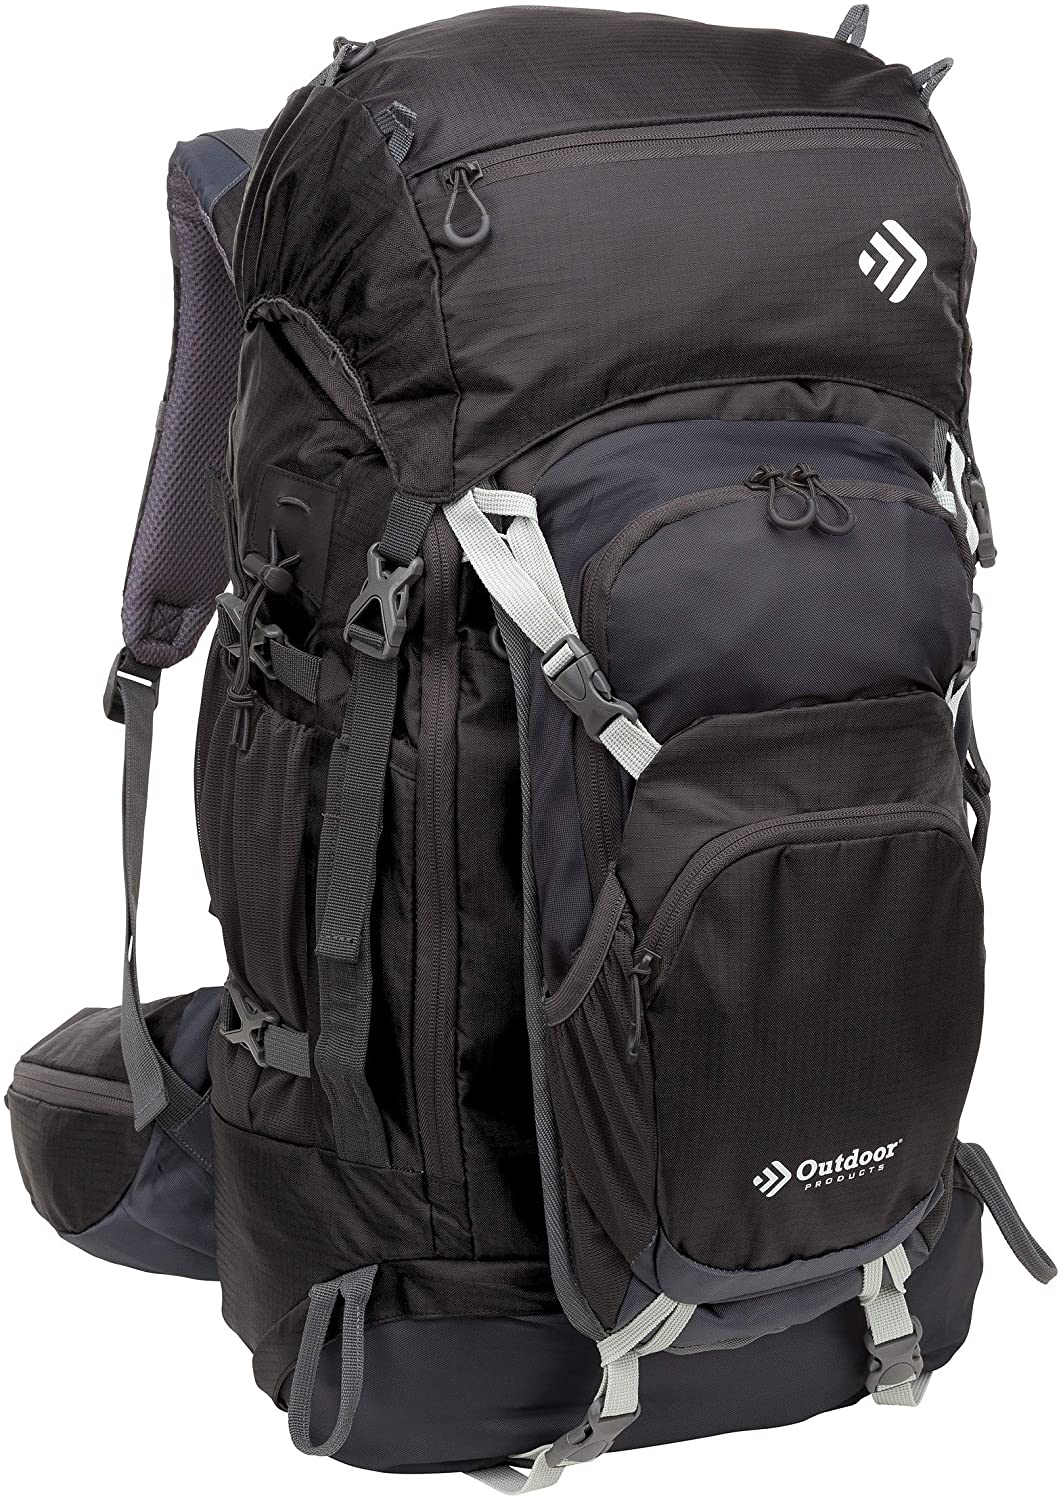 Outdoor Products Black Saguaro 2-in-1 Day/Technical Frame 65.5 L Backpack w/ 2L Reservoir $21.70 + FS w/ Prime or orders of $25+